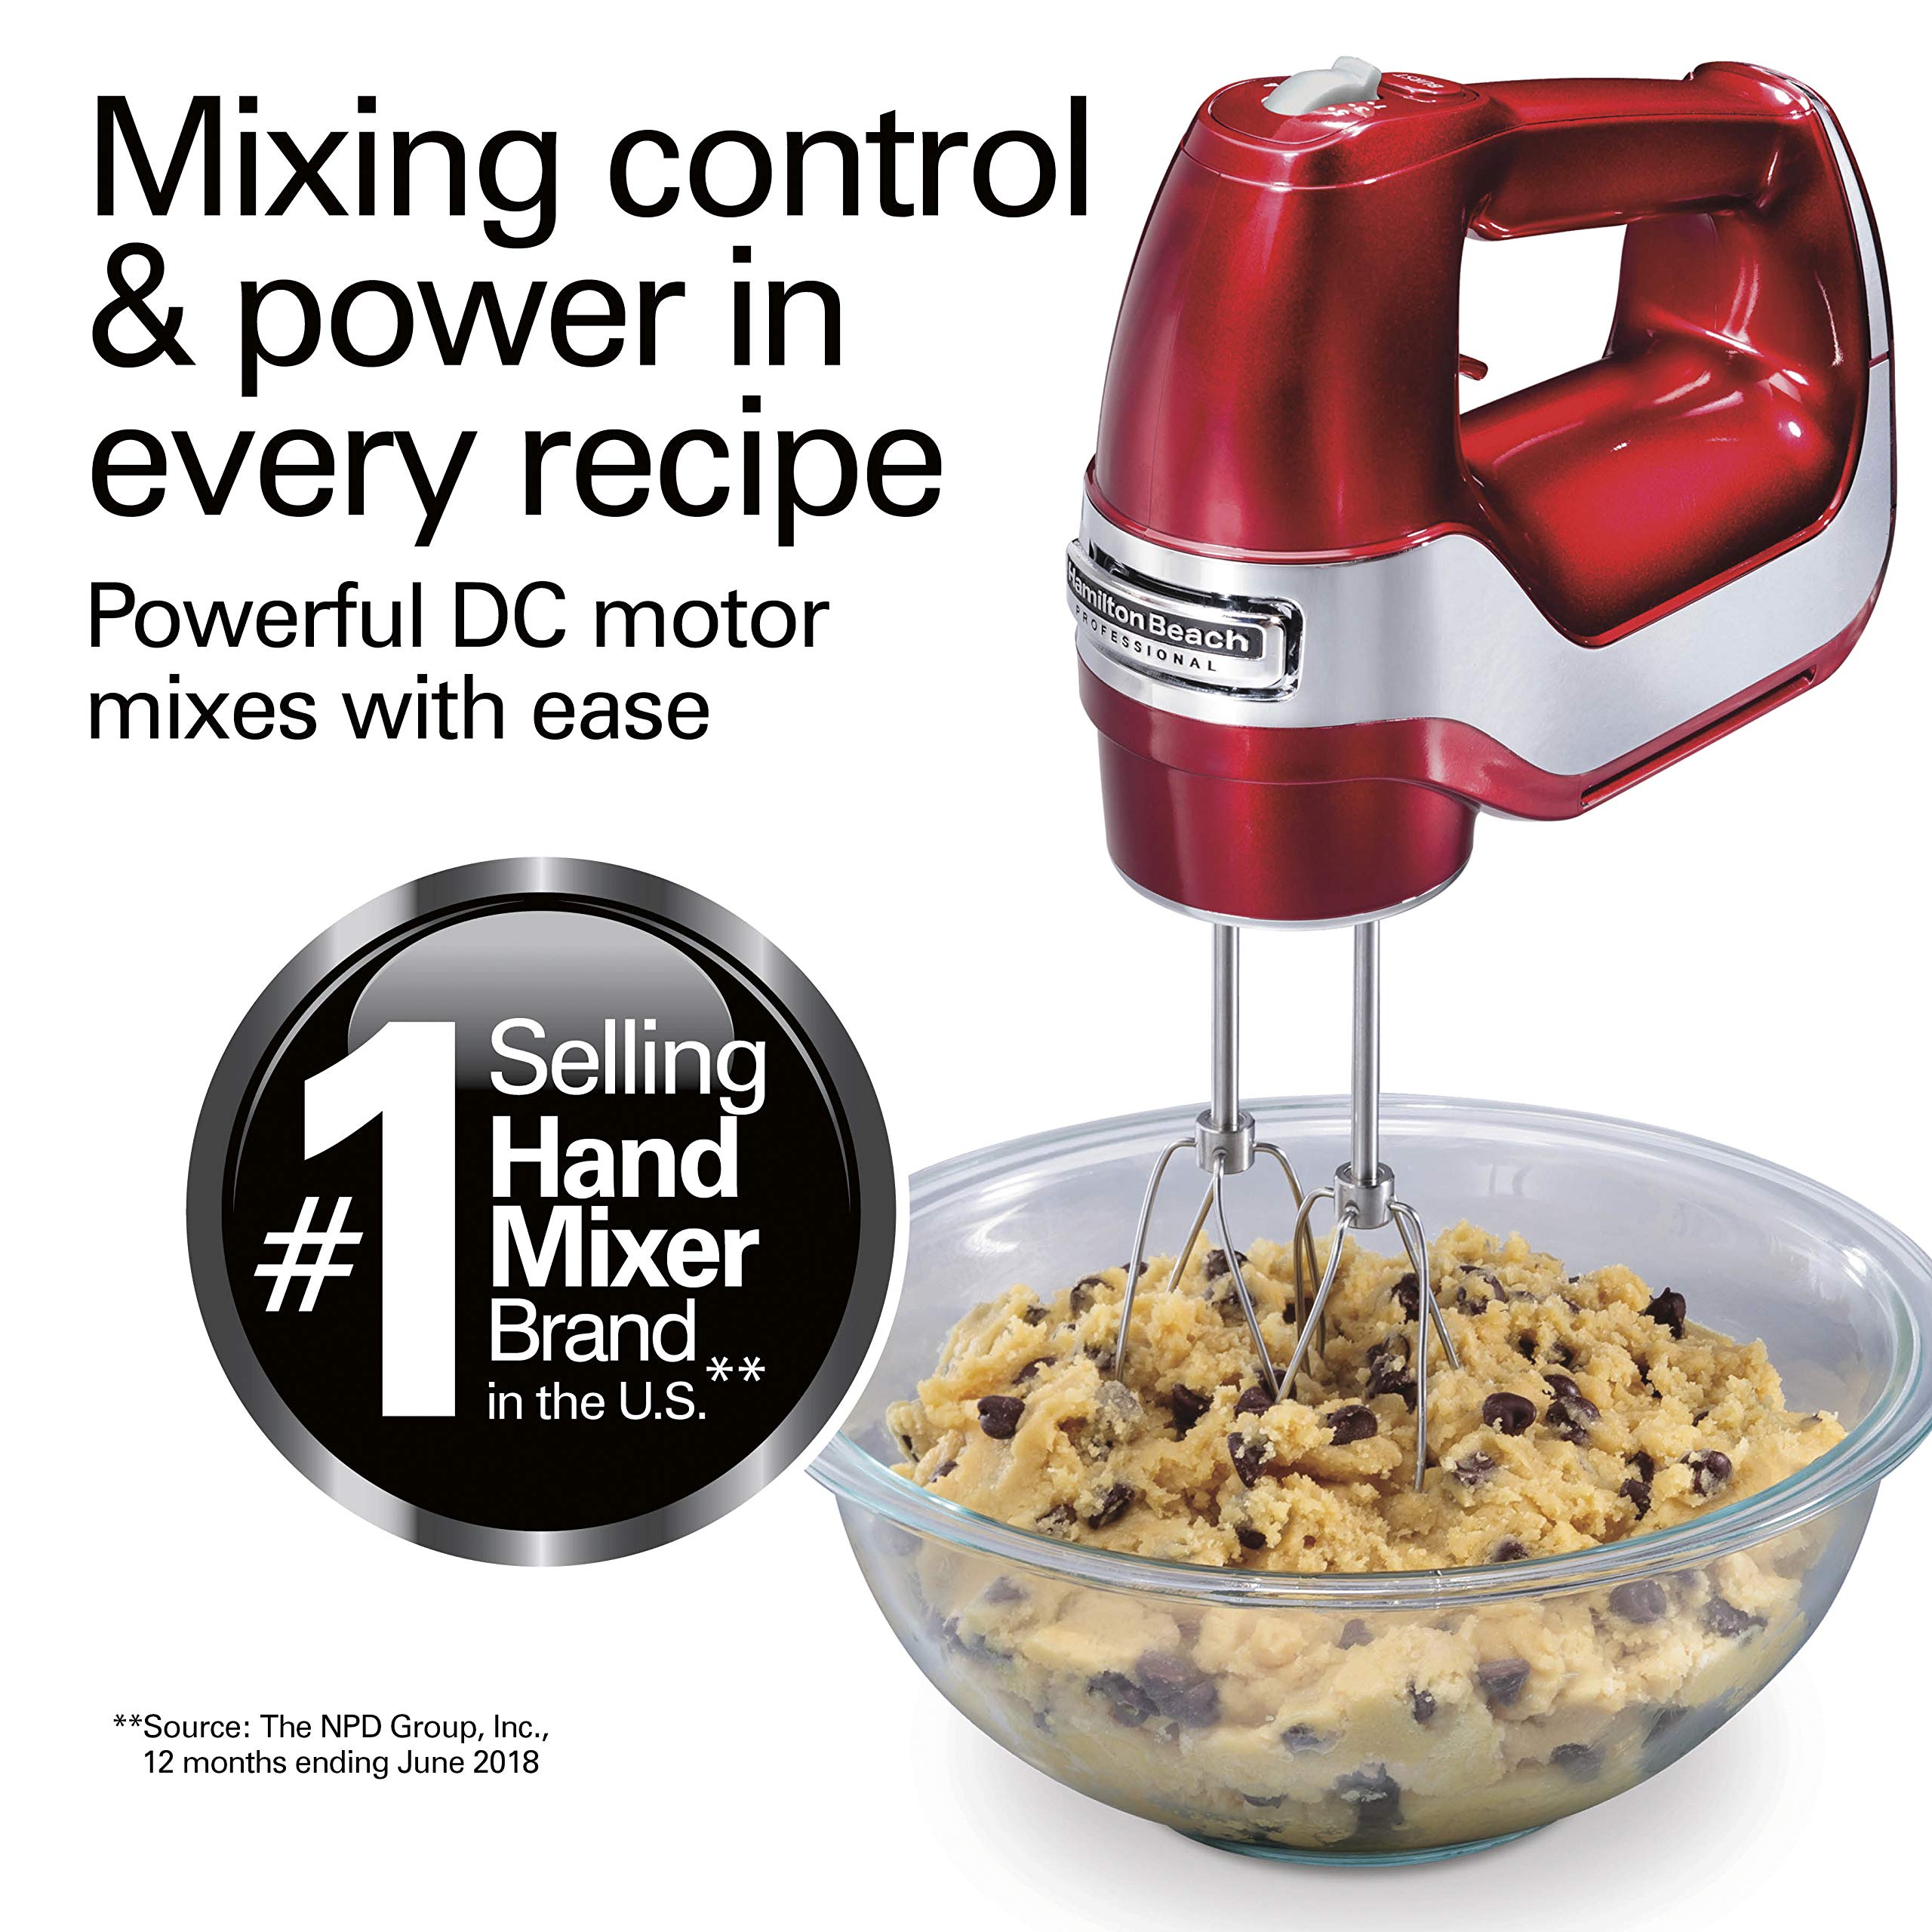 Hamilton Beach Professional 5-Speed Electric Hand Mixer with High-Performance DC Motor Slow Start, Snap-On Storage Case, Stainless Steel Beaters, Dough Hooks & Whisk, Red and Chrome (62653)